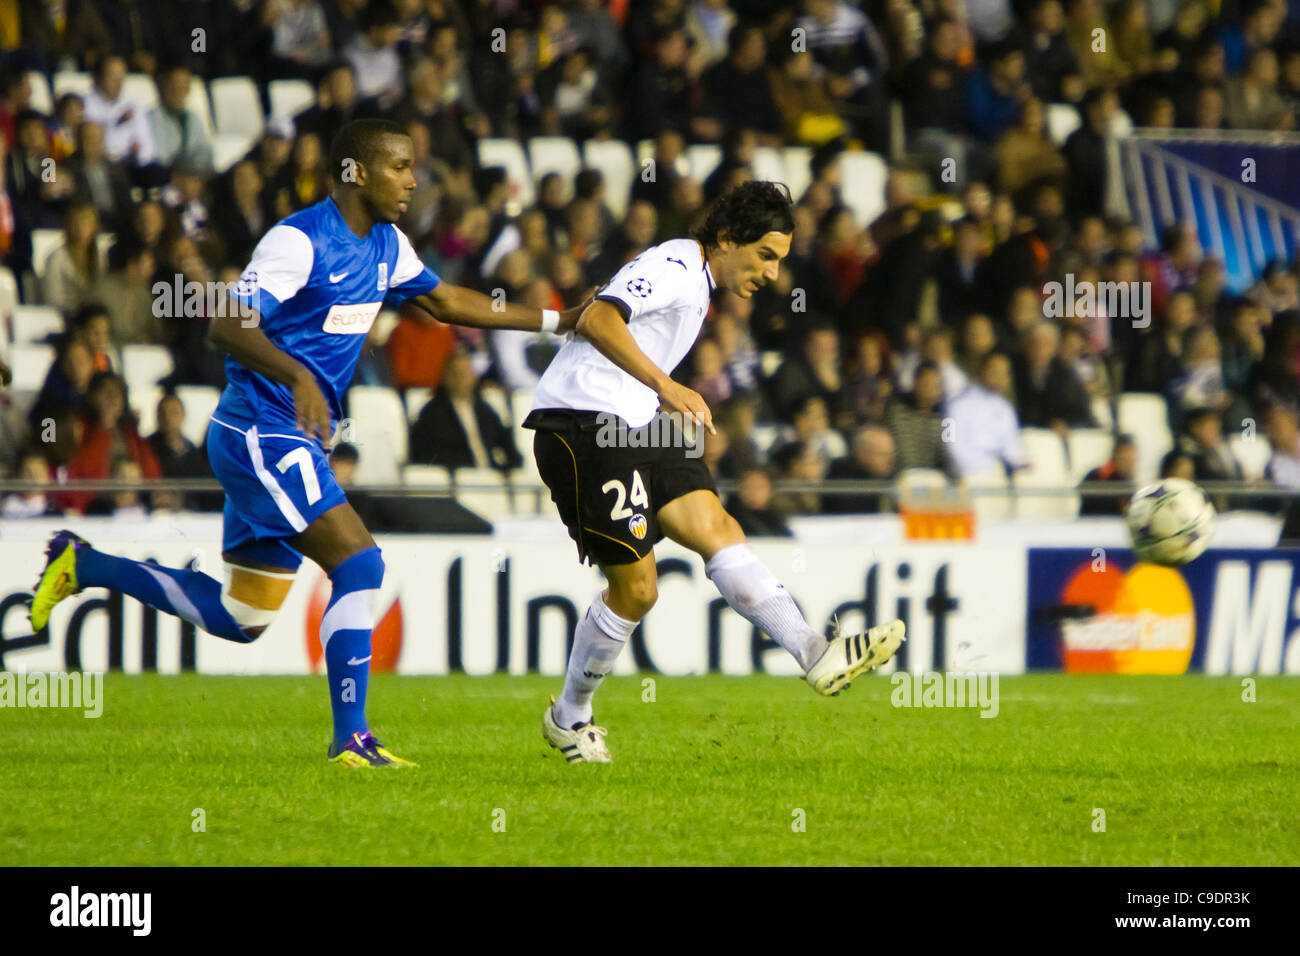 23/11/2011. Valencia, Spain  Football match between Valencia Club de Futbol and KRC Genk, Matchday 5, E Group, Champions League -------------------------------------  Tino Costa midfield player from VAlencia CF as he passes the ball with some oposition from Khaleem Hyland from KRC Genk Stock Photo